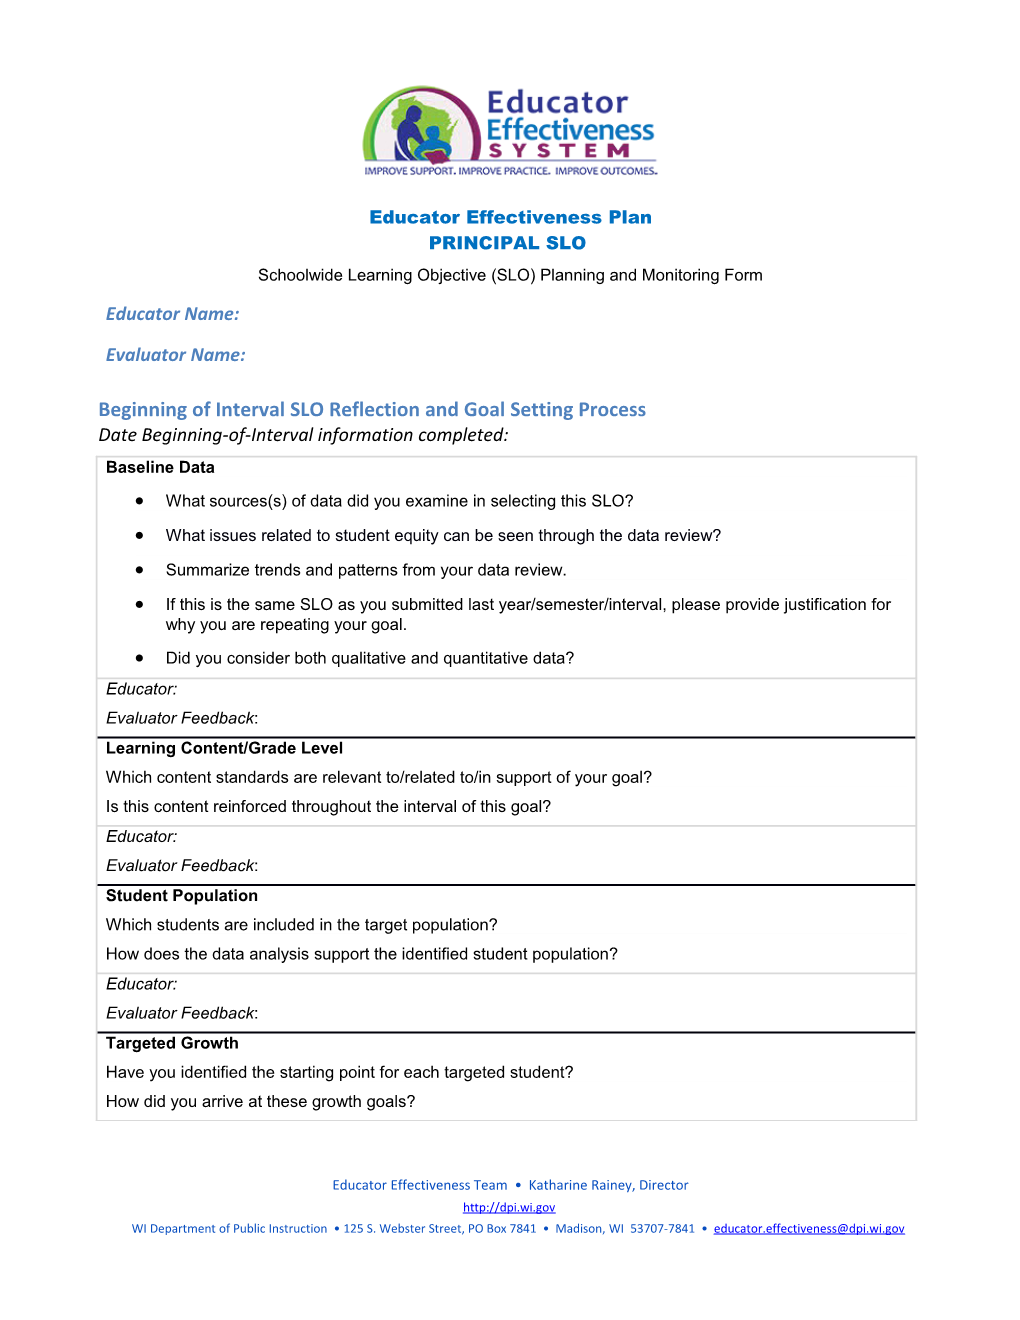 Schoolwide Learning Objective (SLO) Planning and Monitoring Form